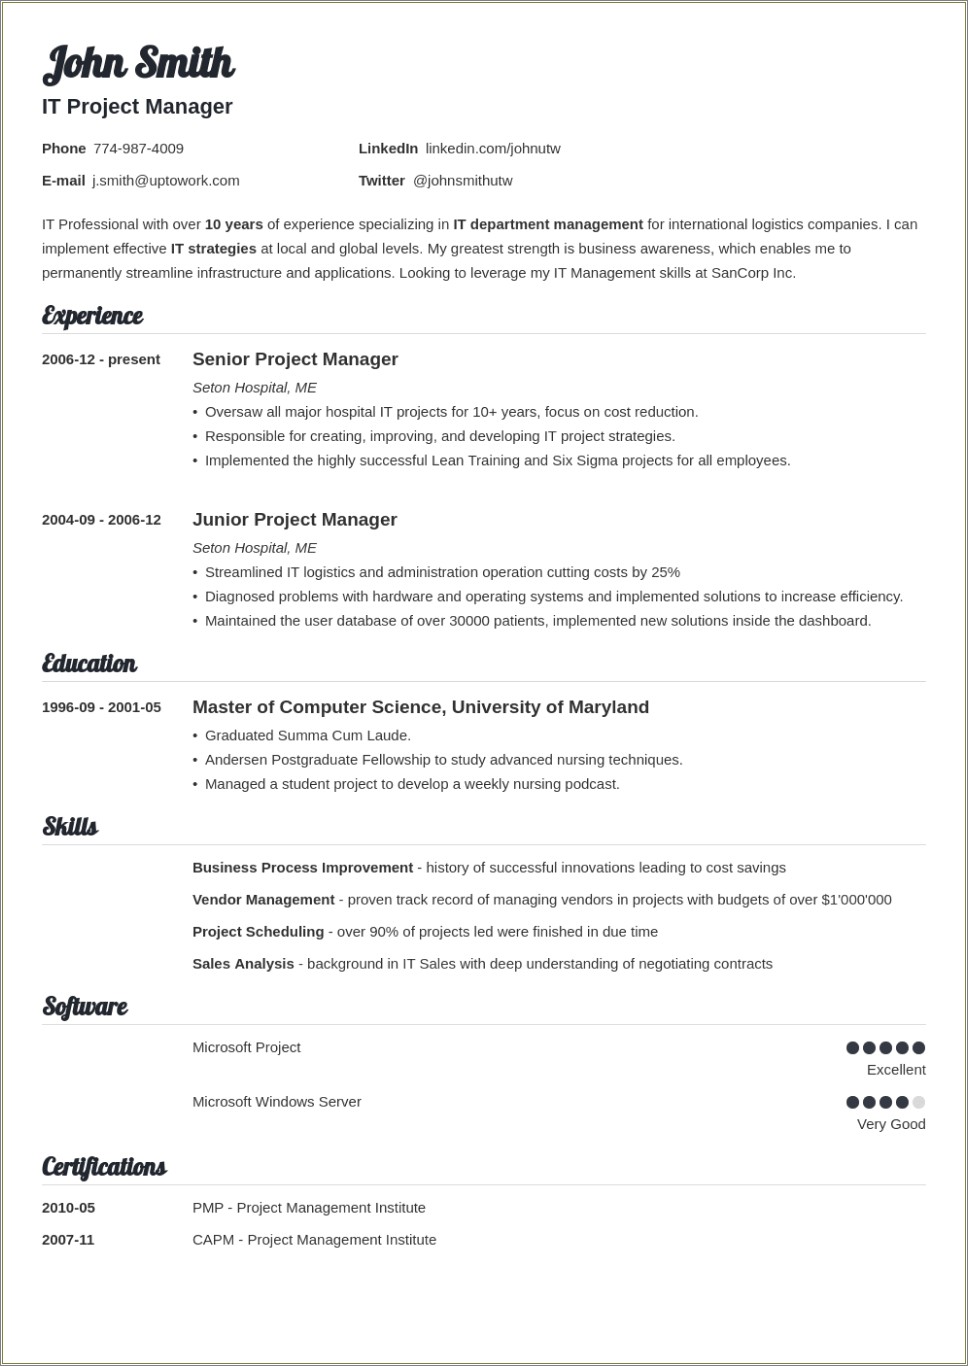 resume-format-for-it-jobs-resume-example-gallery